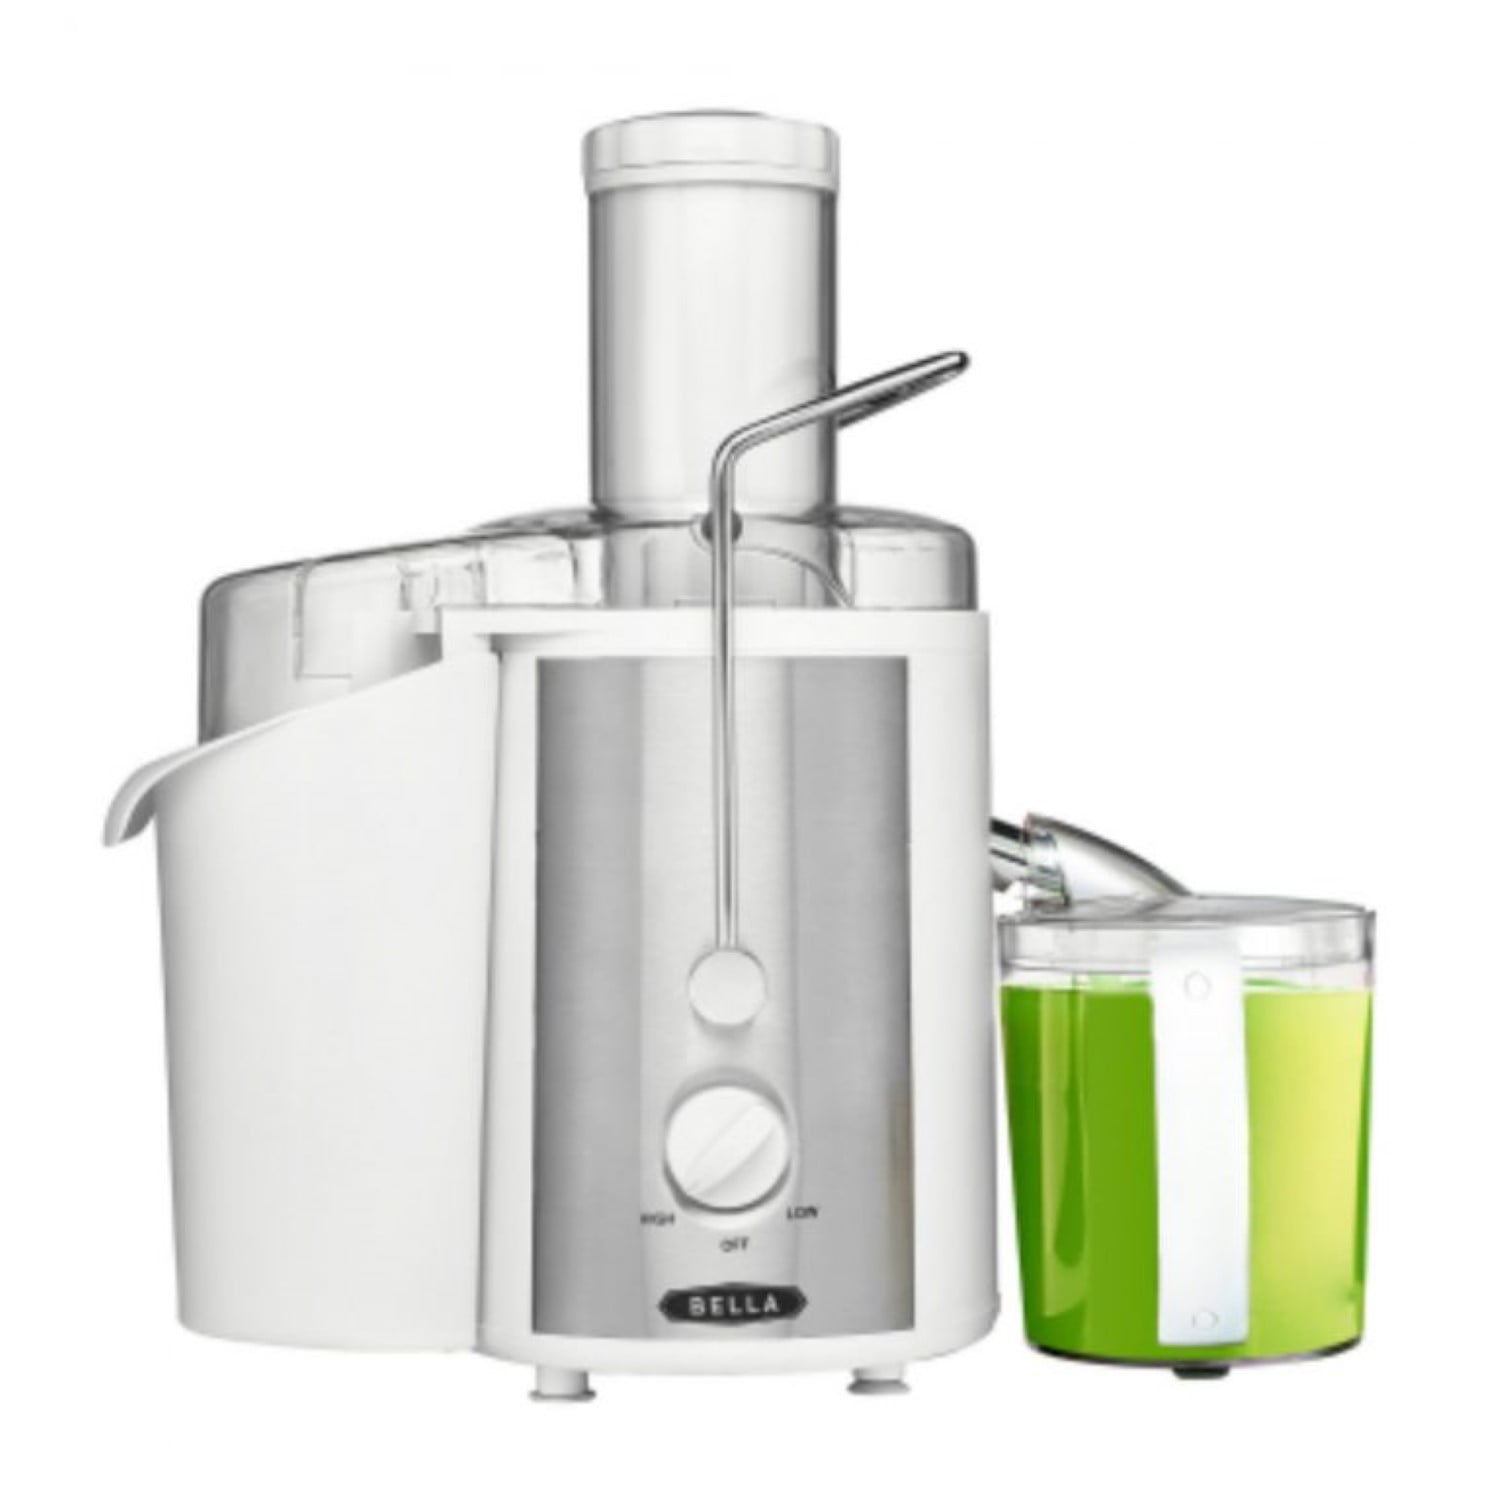 BELLA BLA14937 Juice Extractor, White with Stainless Steel